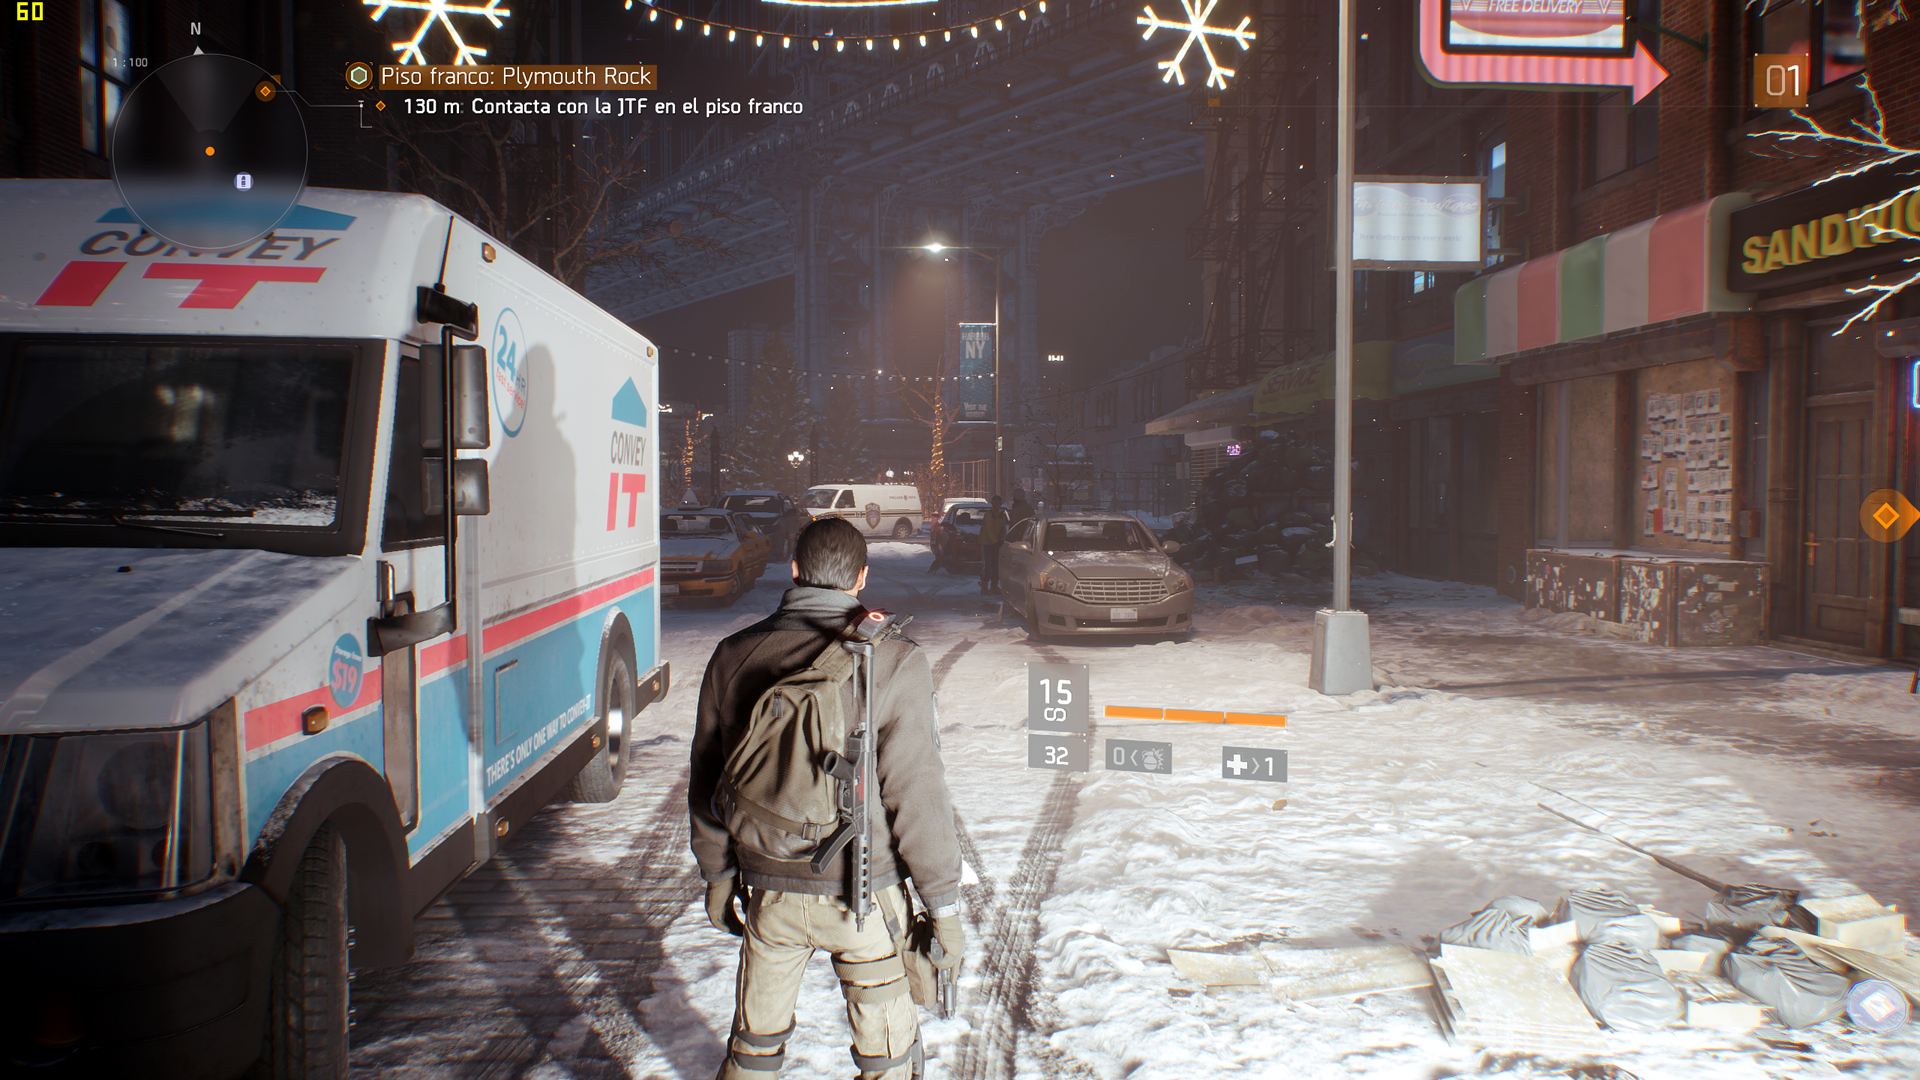 thedivision2016-11-26i9ujv.png